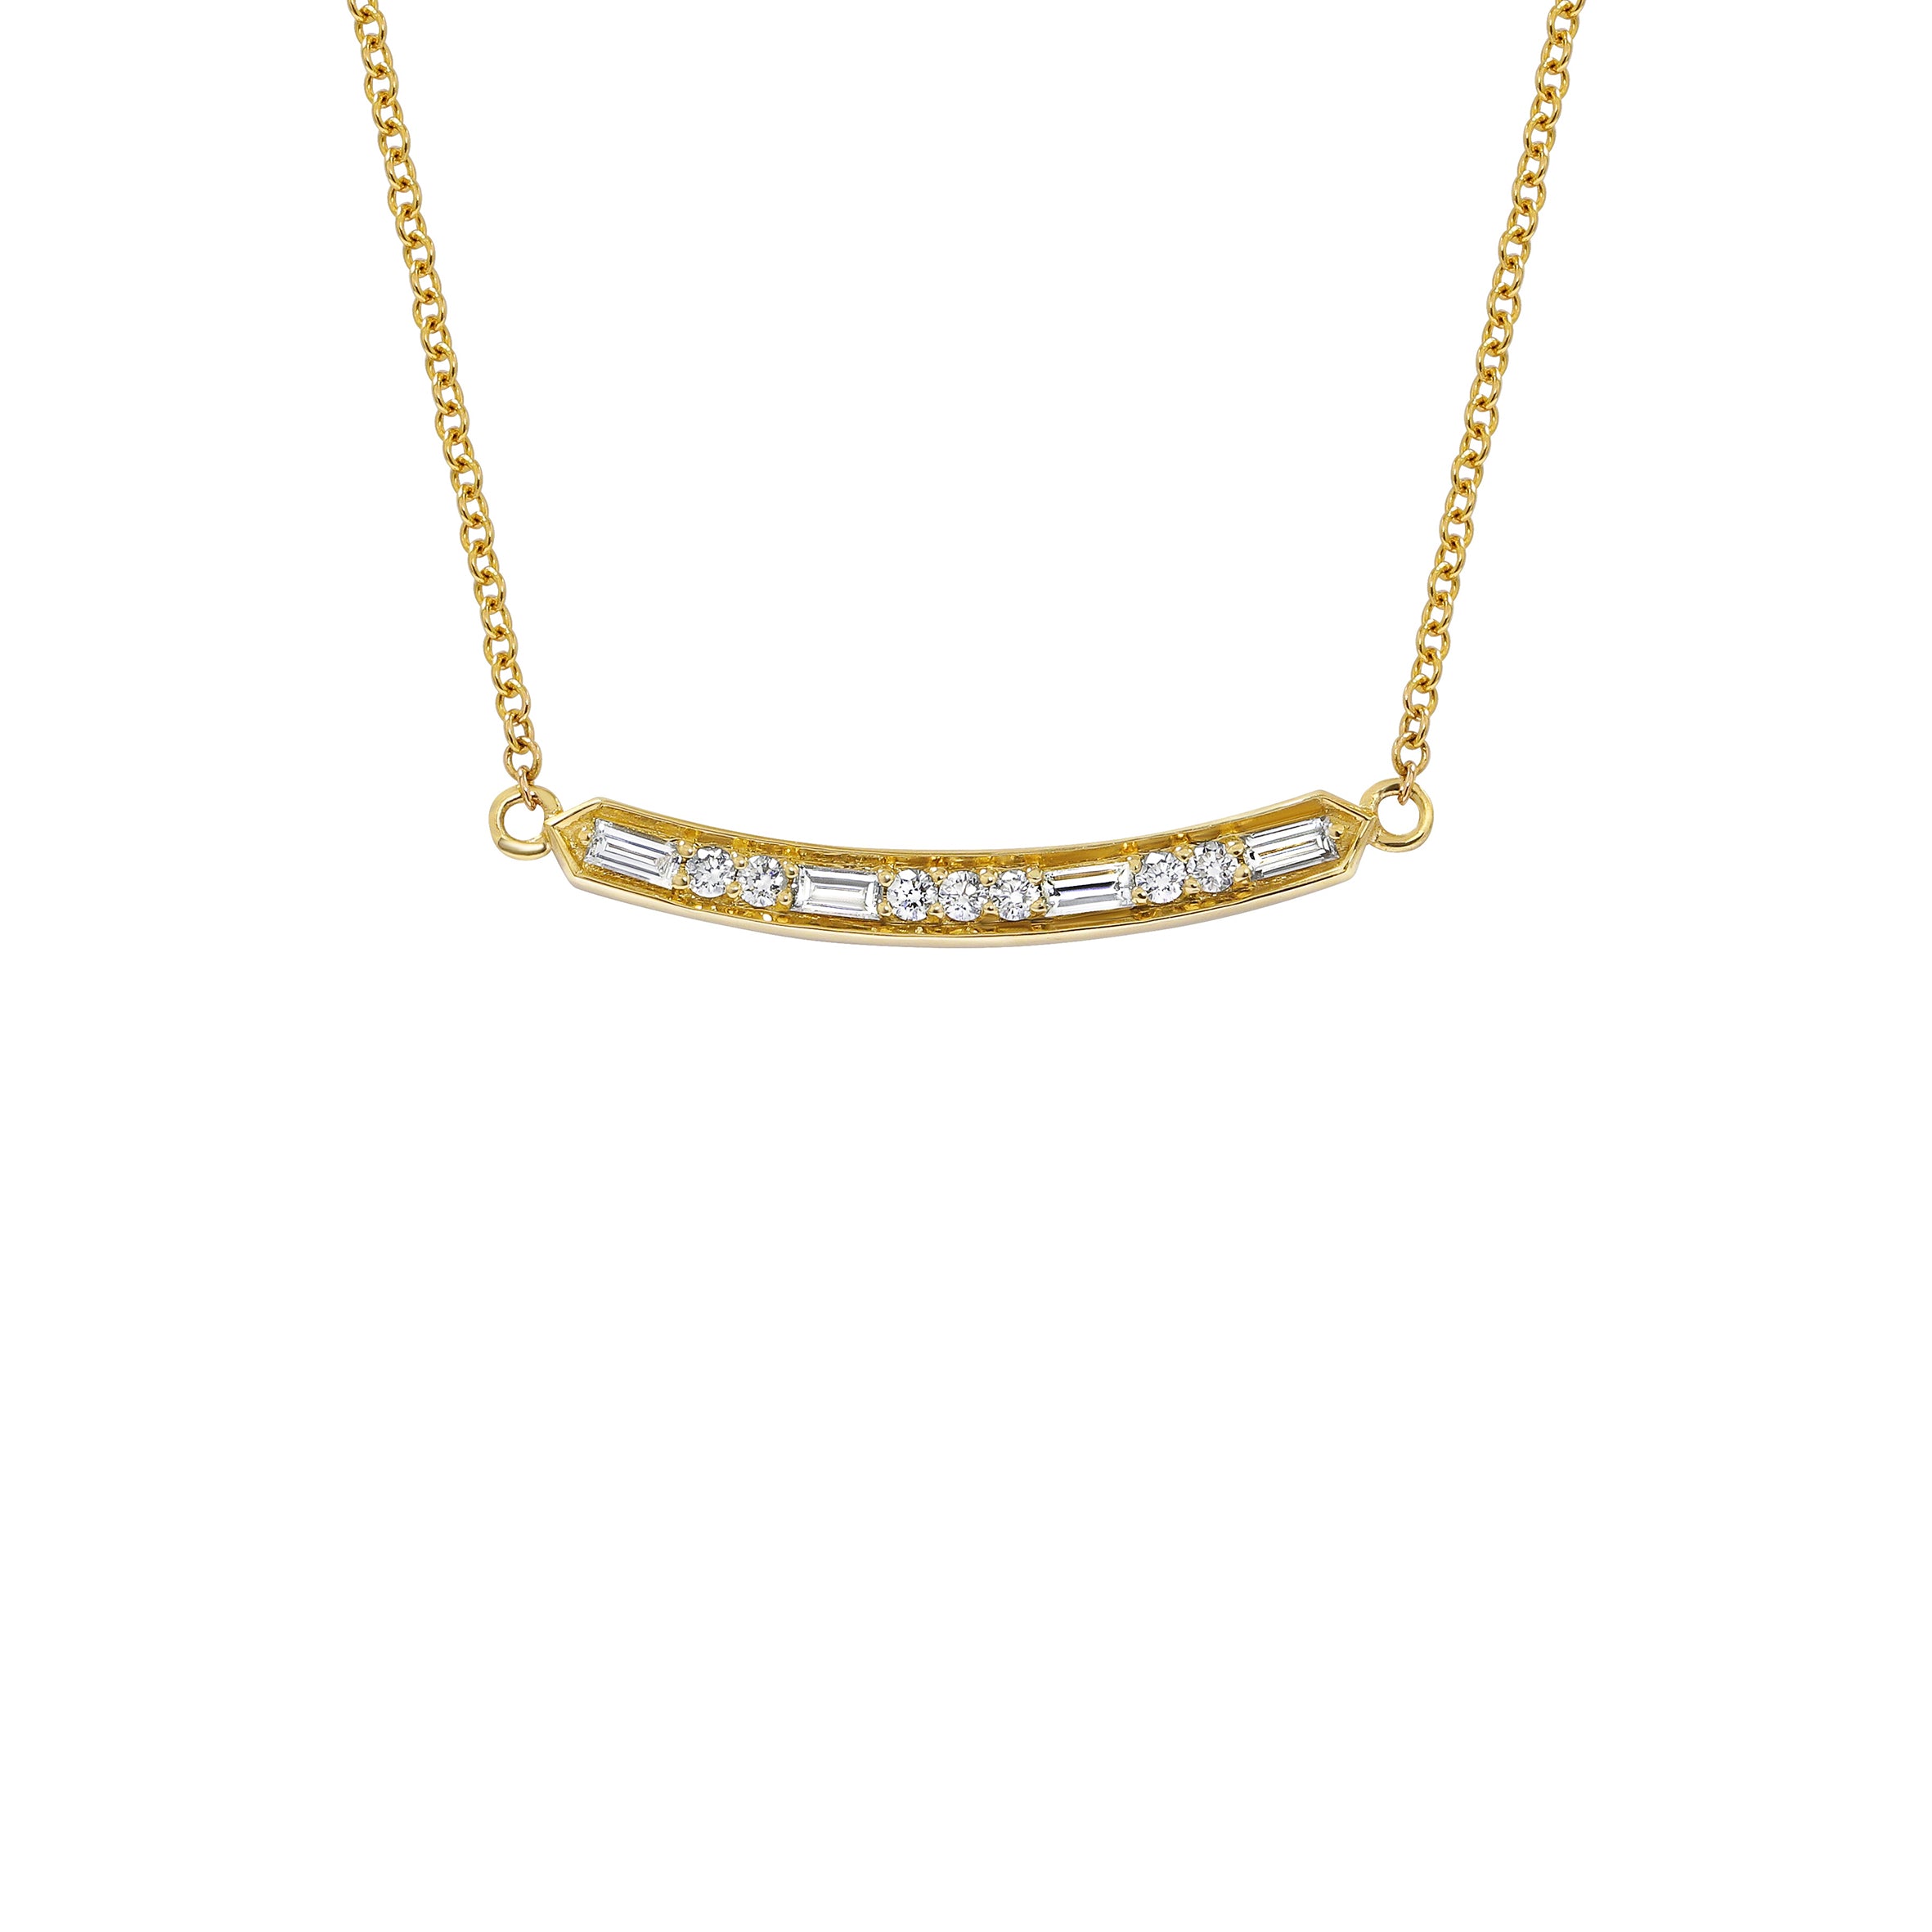 The Deco Bar Necklace by East London jeweller Rachel Boston | Discover our collections of unique and timeless engagement rings, wedding rings, and modern fine jewellery.